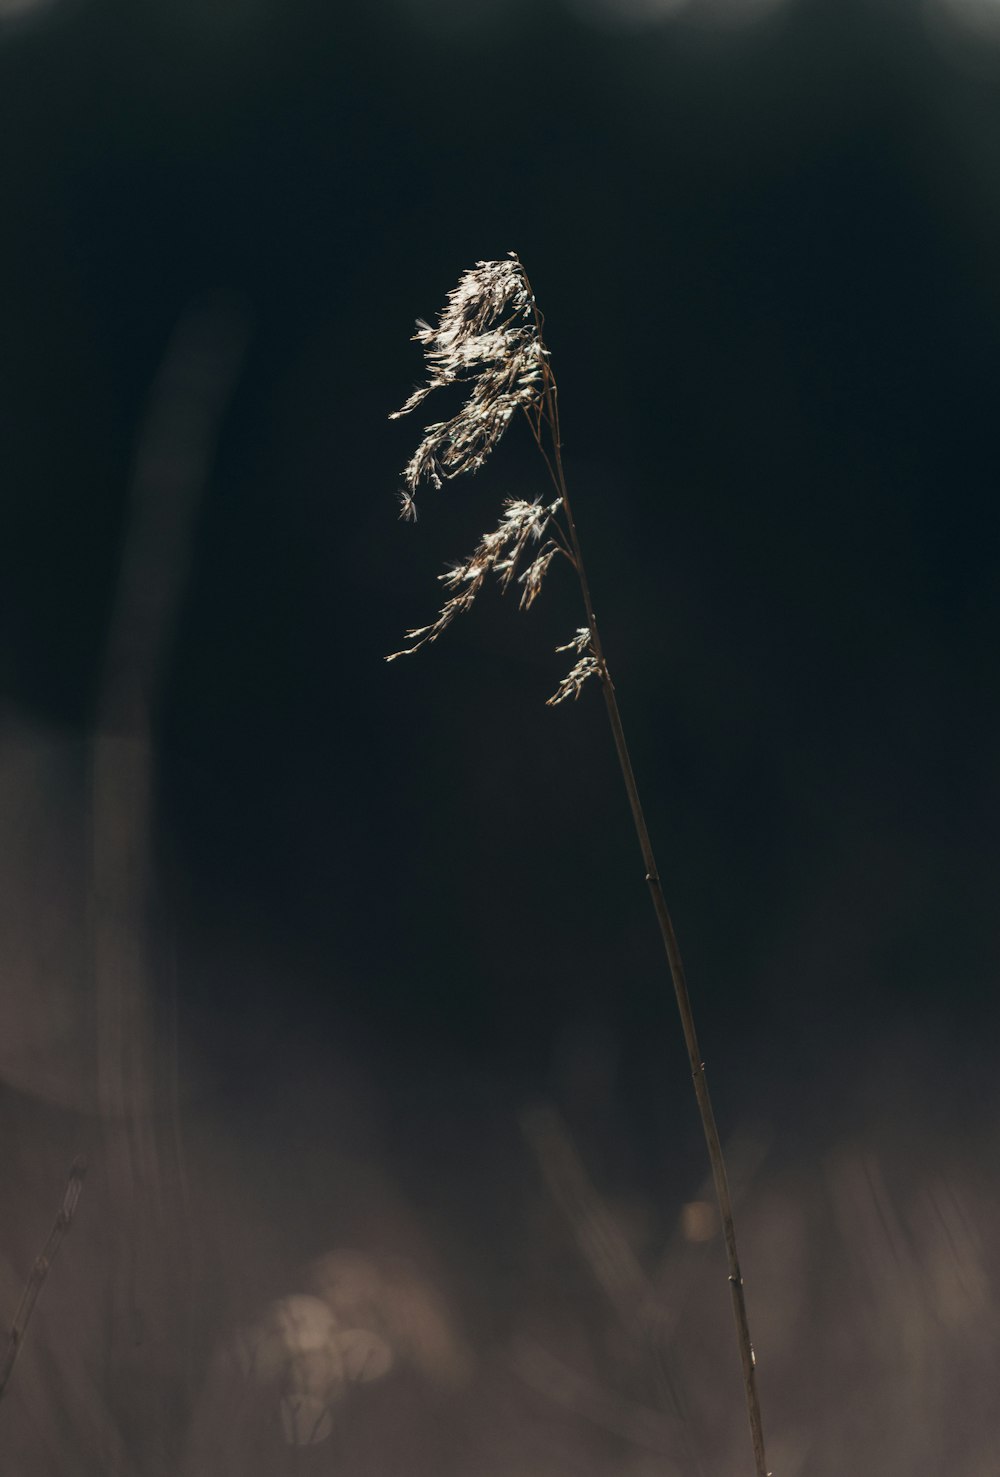 a tall plant with long stems in the dark